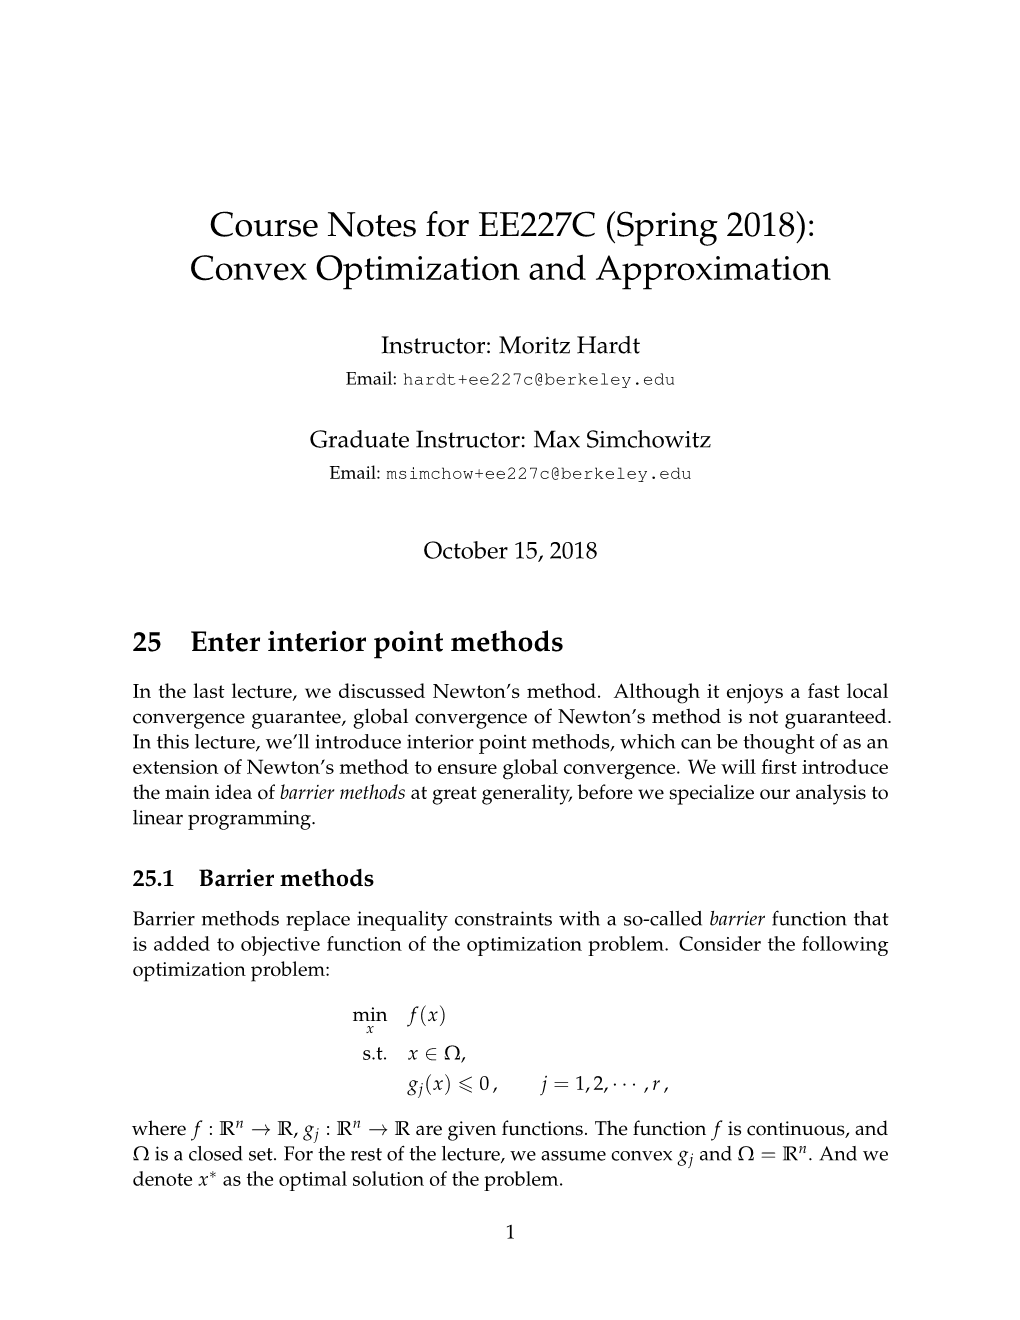 EE227C: Convex Optimization and Approximation